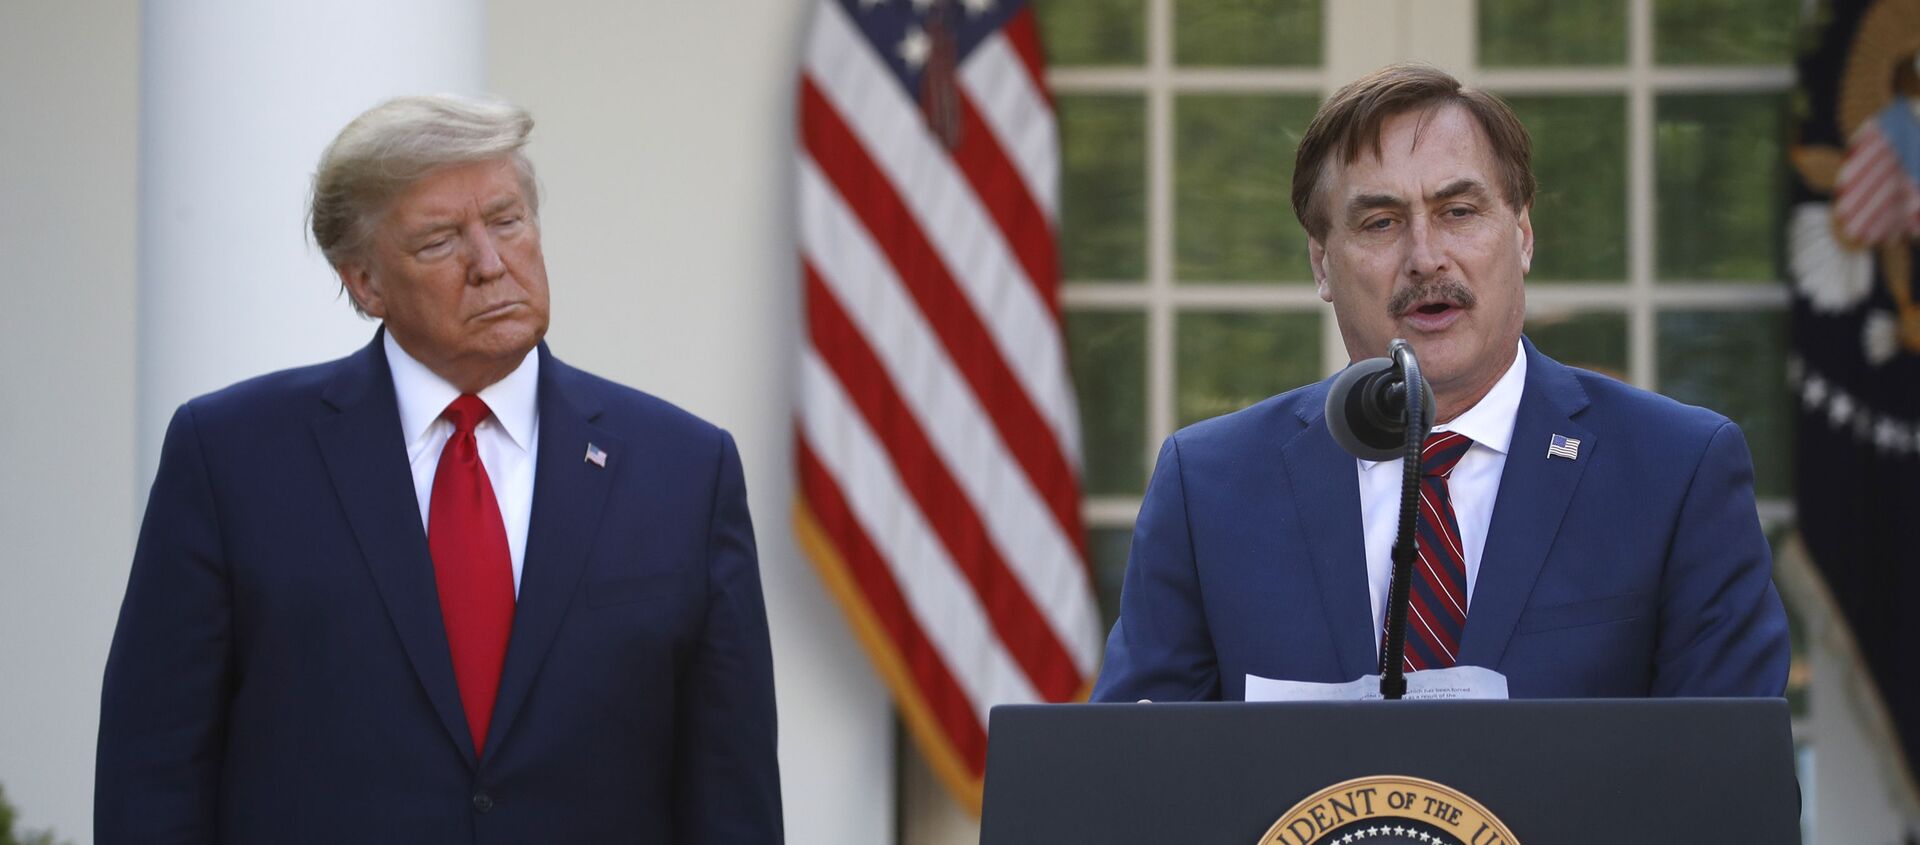 My Pillow CEO Mike Lindell speaks as President Donald Trump listens during a briefing about the coronavirus in the Rose Garden of the White House, Monday, March 30, 2020, in Washington - Sputnik International, 1920, 19.01.2021